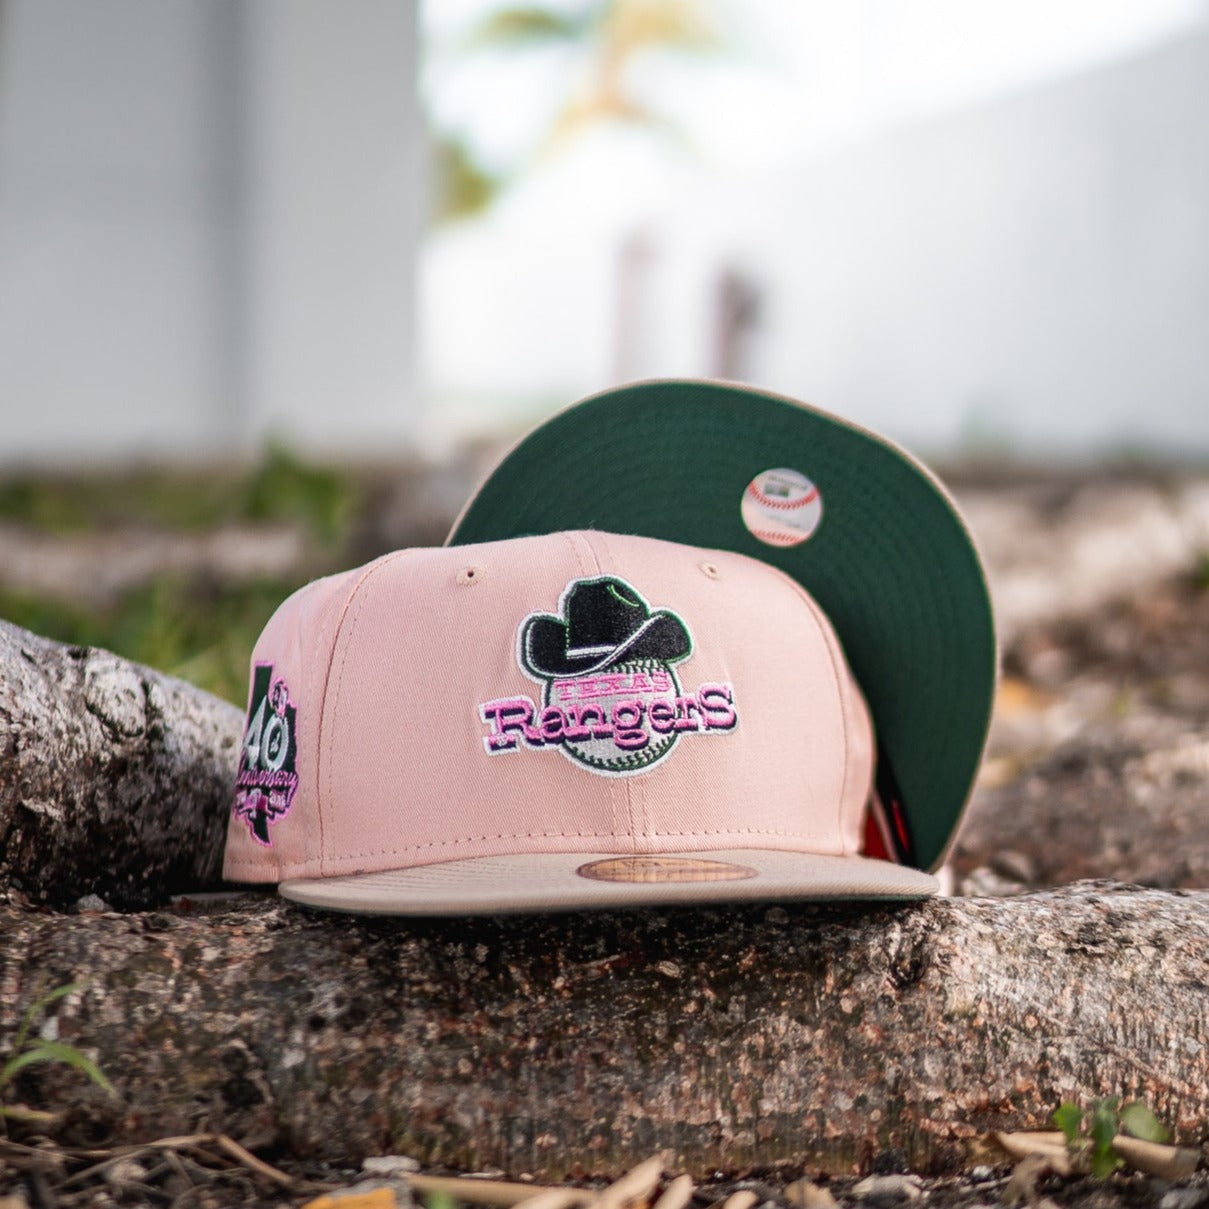 🤠 New Era Texas Rangers 40th Anniversary Pine Green UV (Light Pink/Beige)  📍Now Available On the SneakerTown App, www.SNEAKERTOWN.com and…